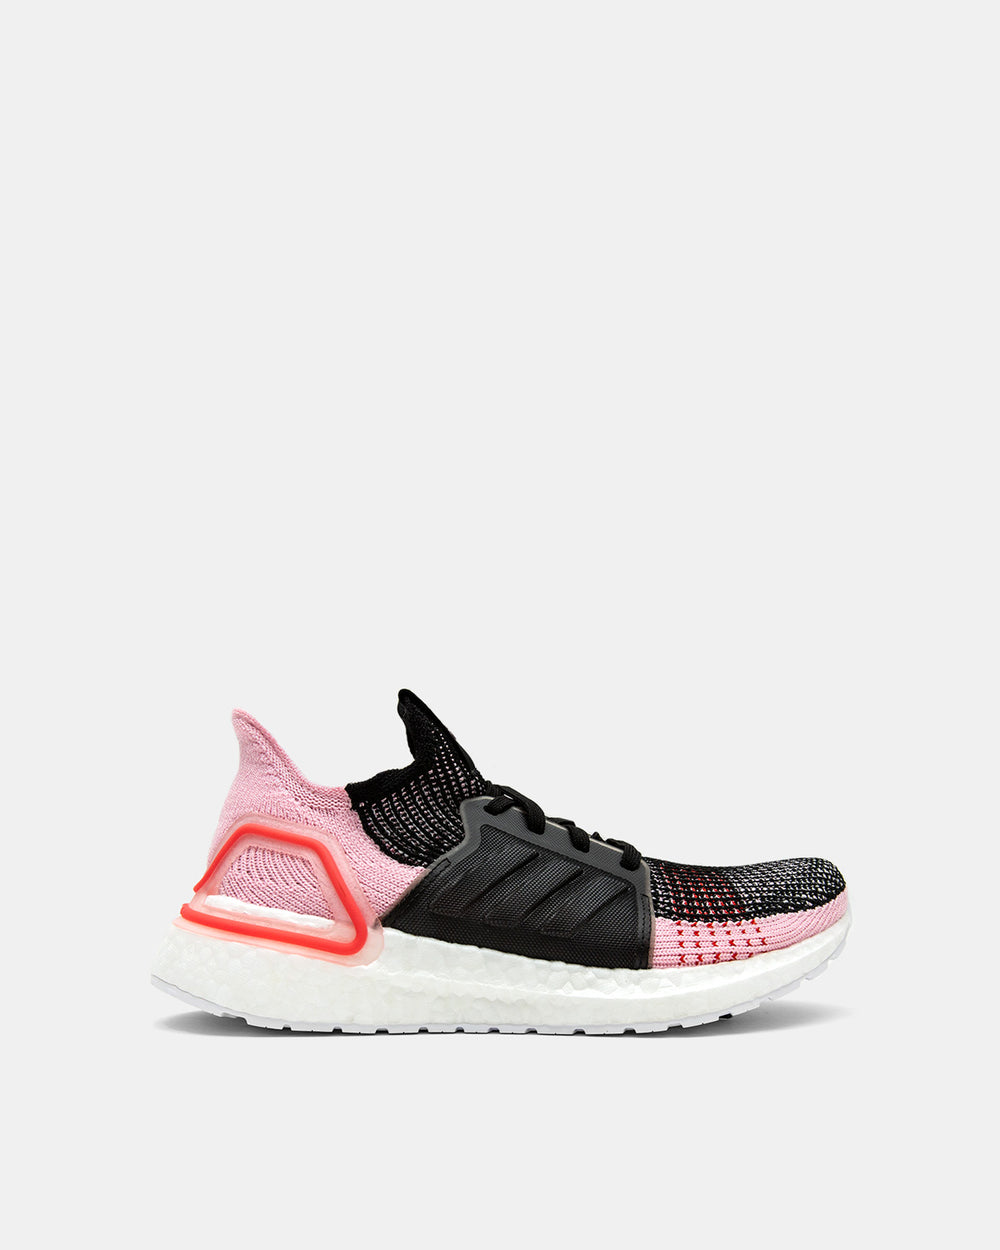 adidas ultra boost 19 black orchid